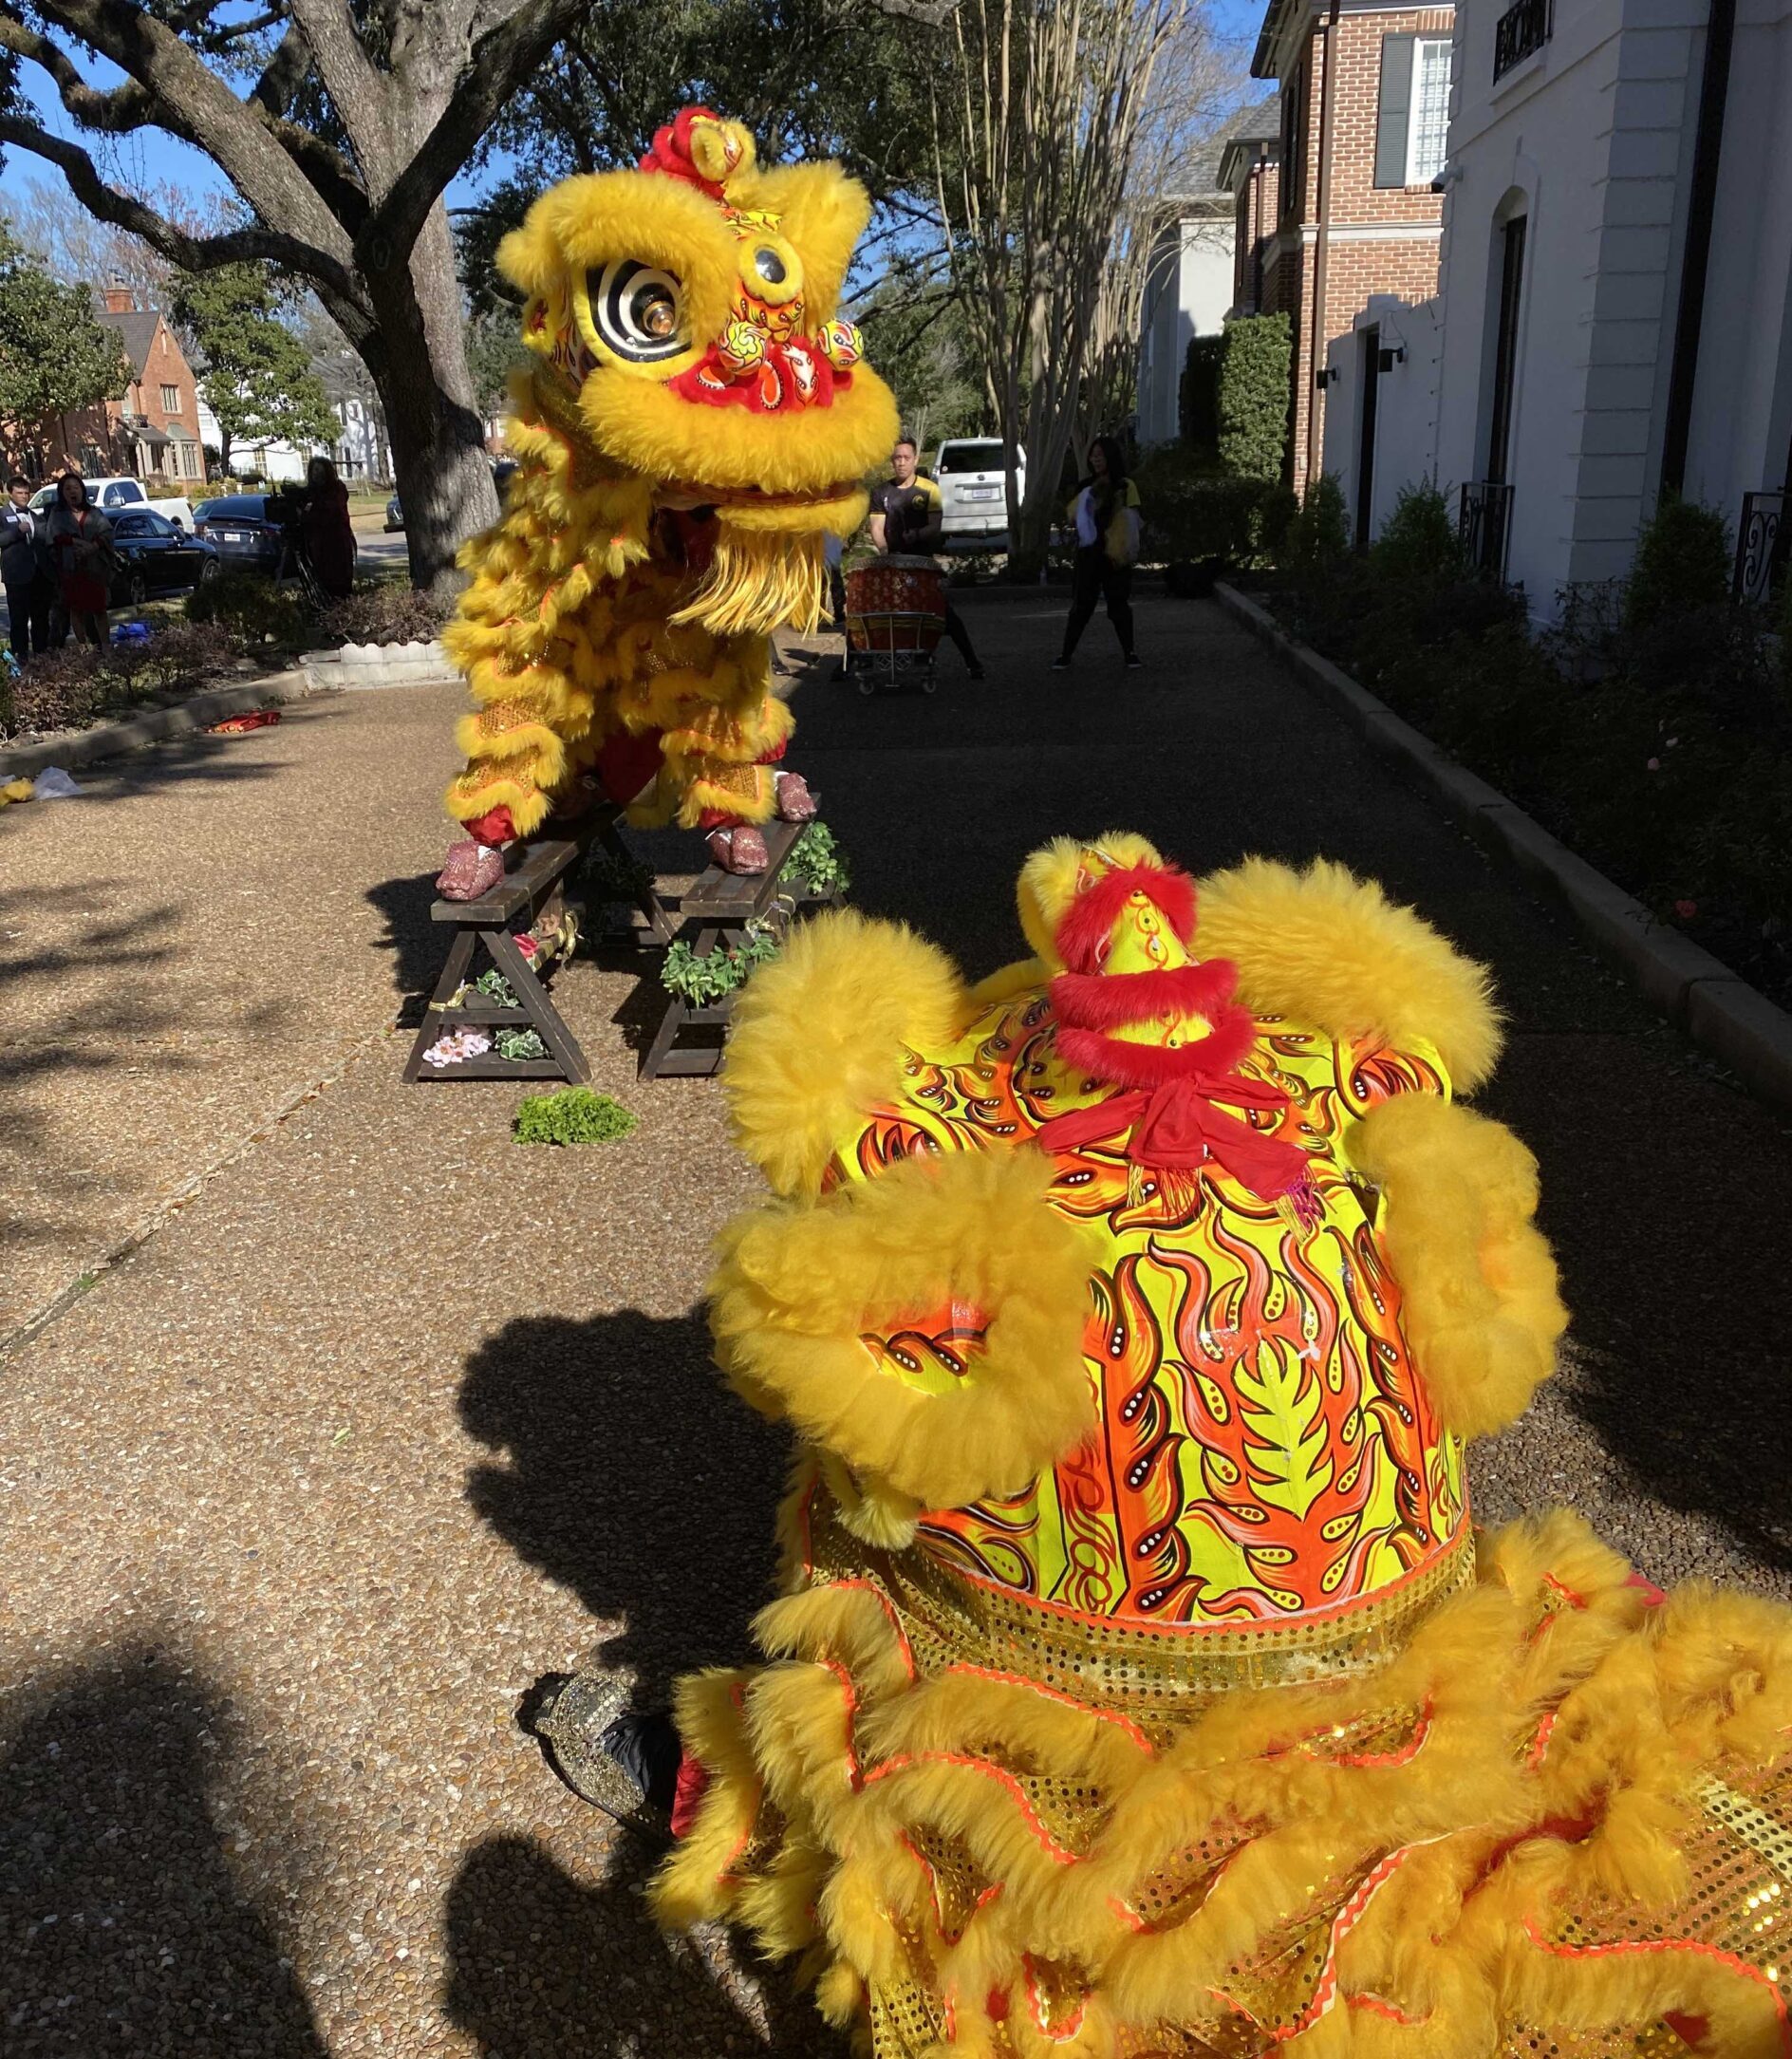 Chen Liang. "The Dragon Dance was performed on a fundraising event in the Vietnamese community for one of the only two Vietnamese American political candidates in Houston."